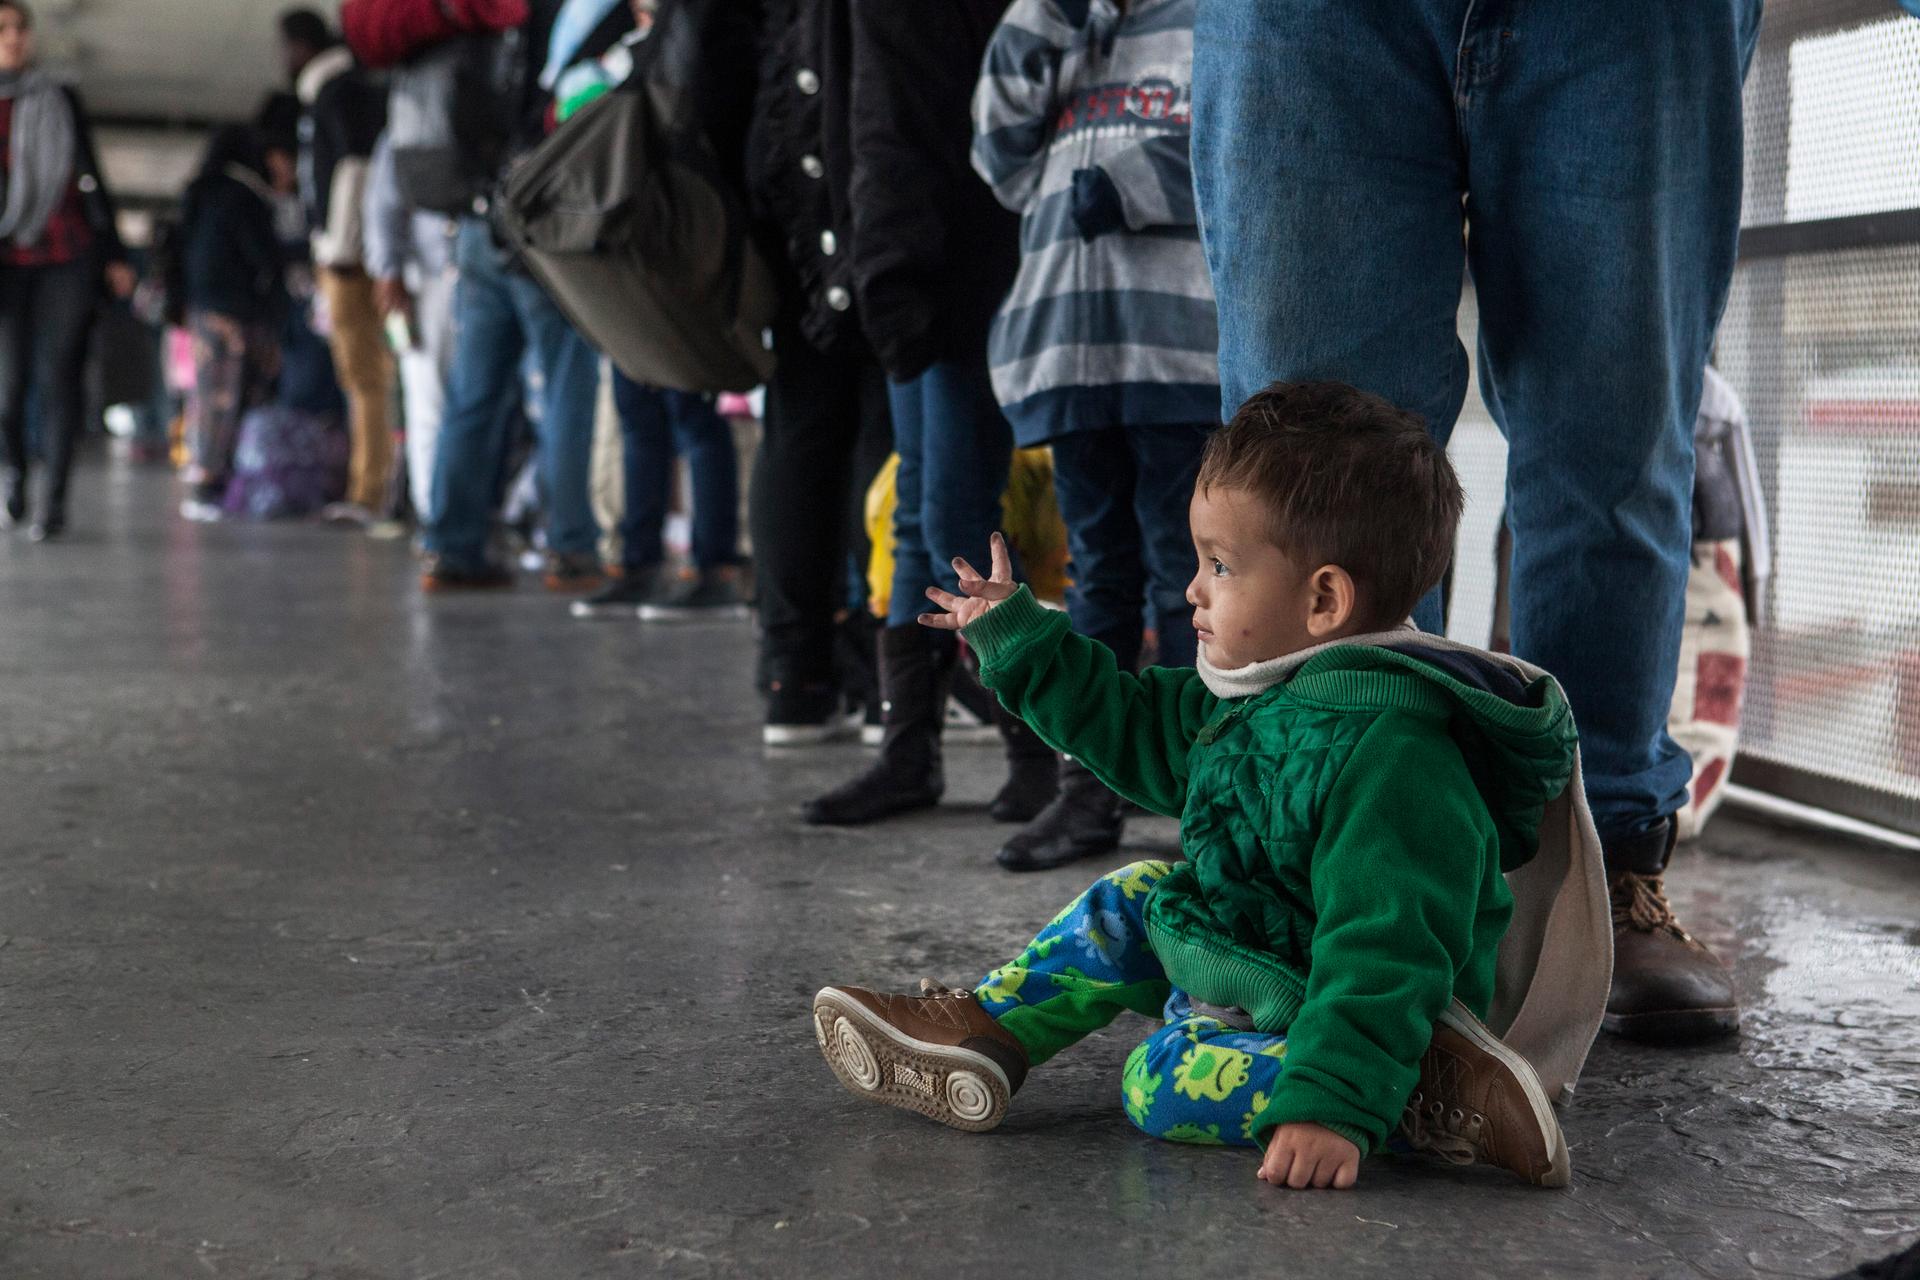 A young Central American boy sits while waiting in the line of asylum seekers who turned themselves in at the U.S. border on Sunday, May 7, 2017.